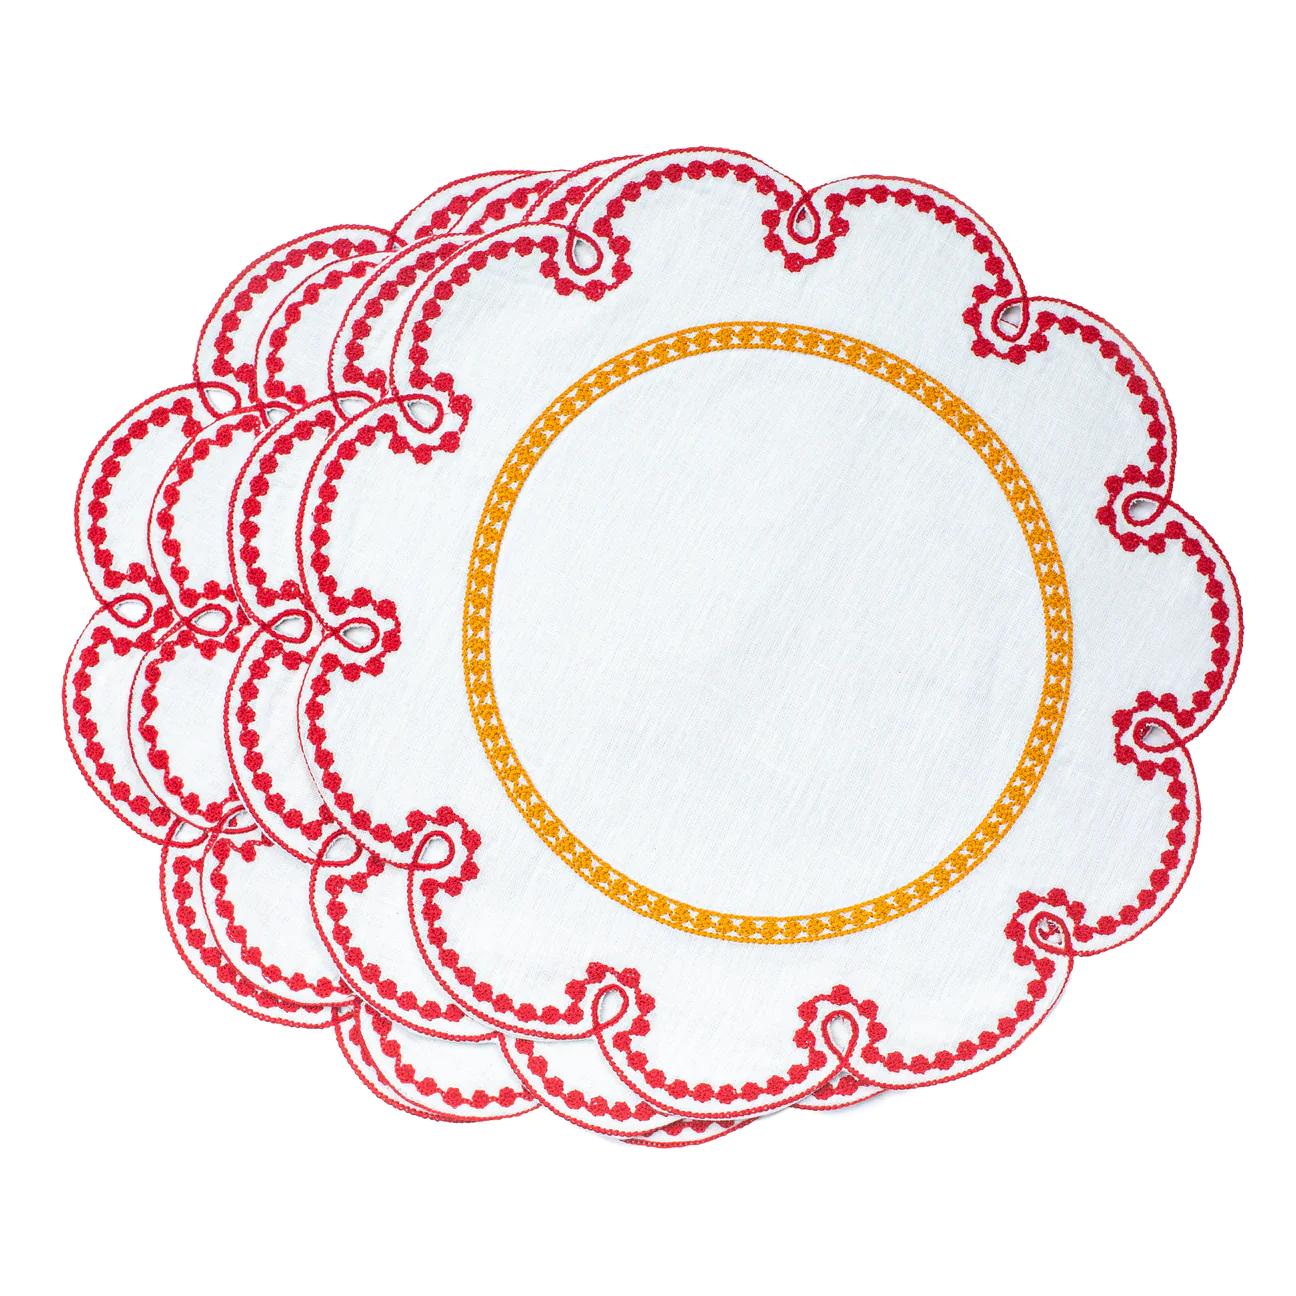 Product Image for Fête Embroidered Linen Placemats, Red/Amber